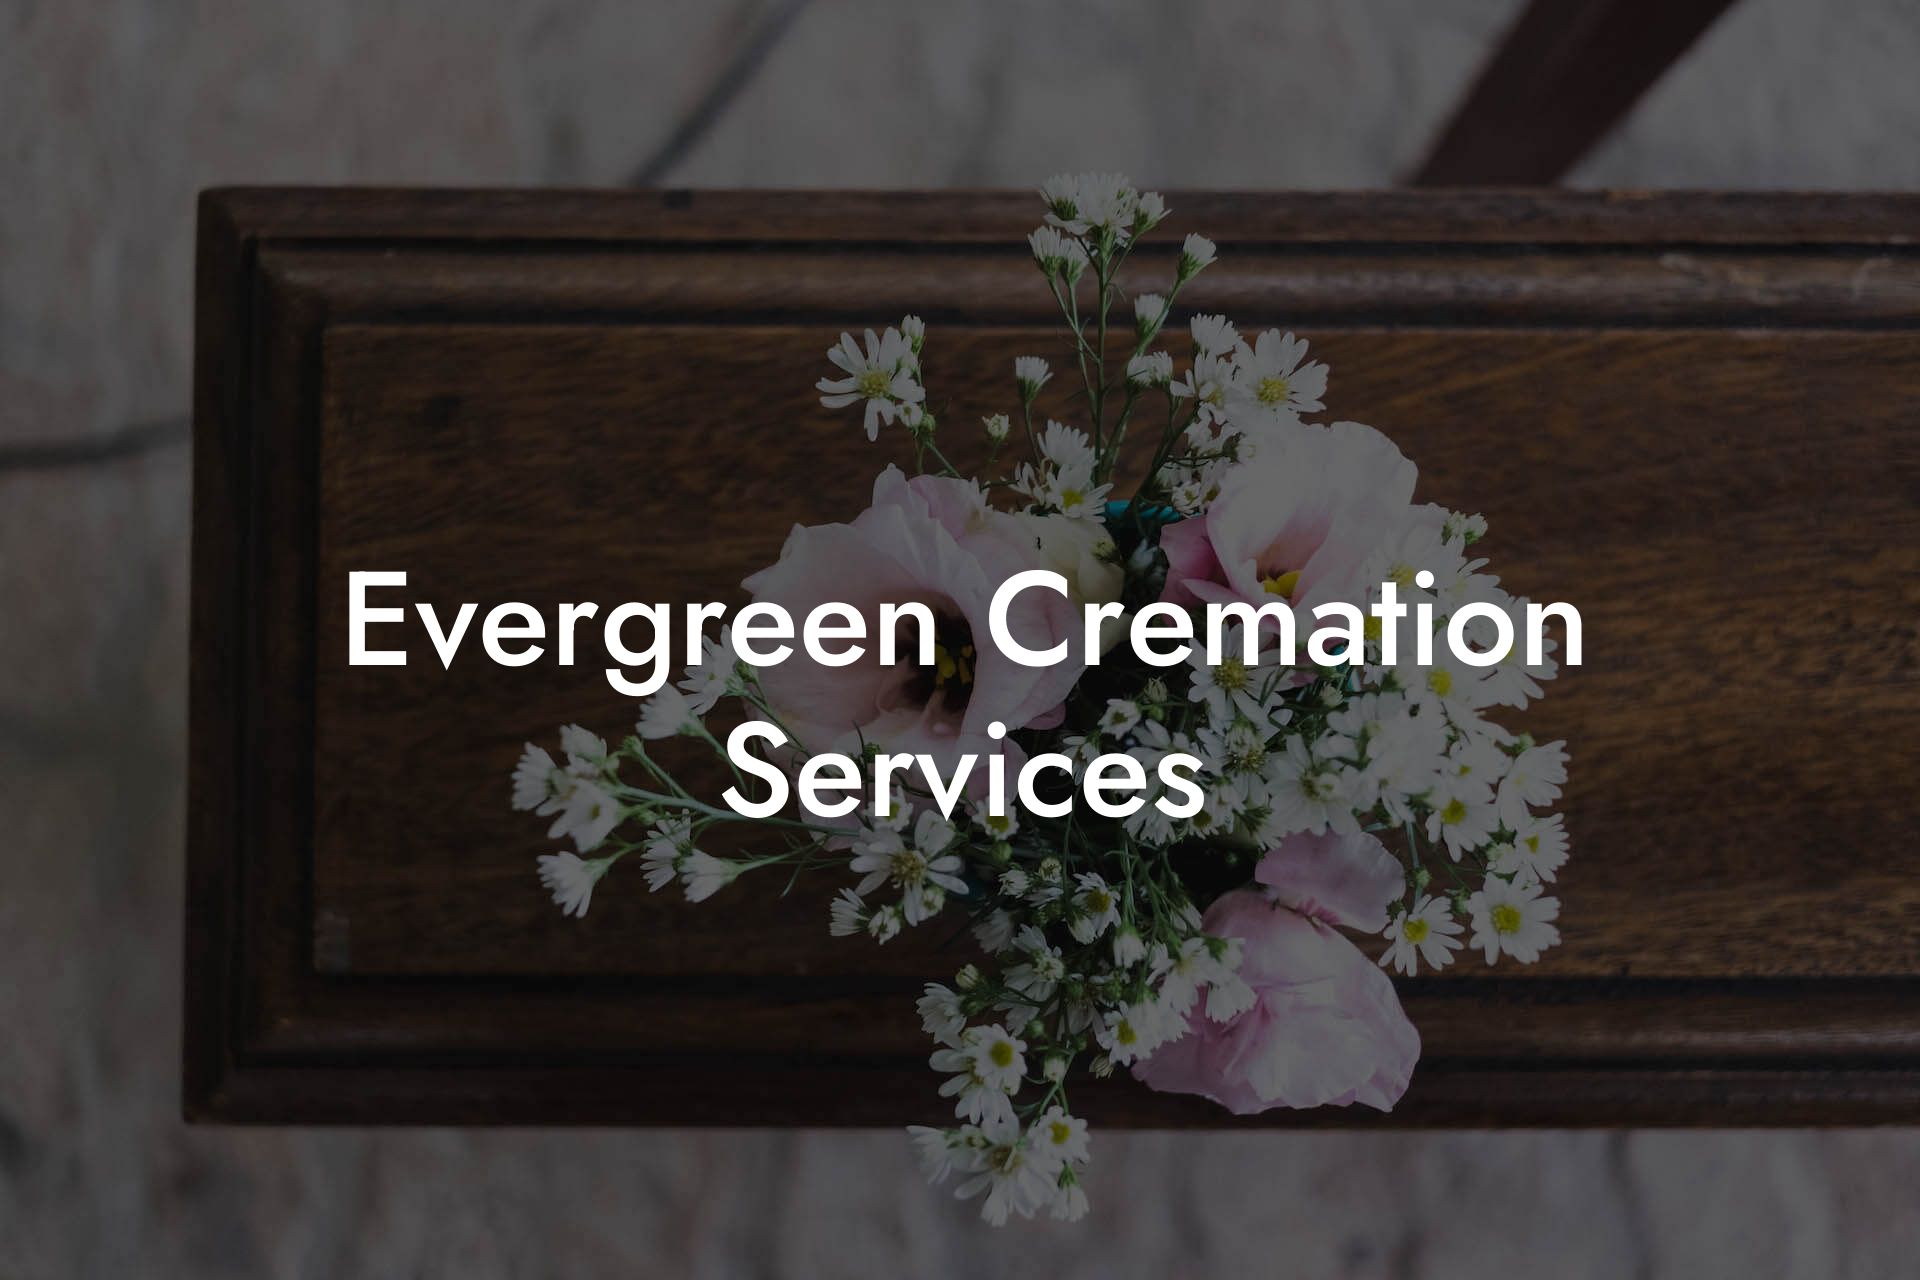 Evergreen Cremation Services